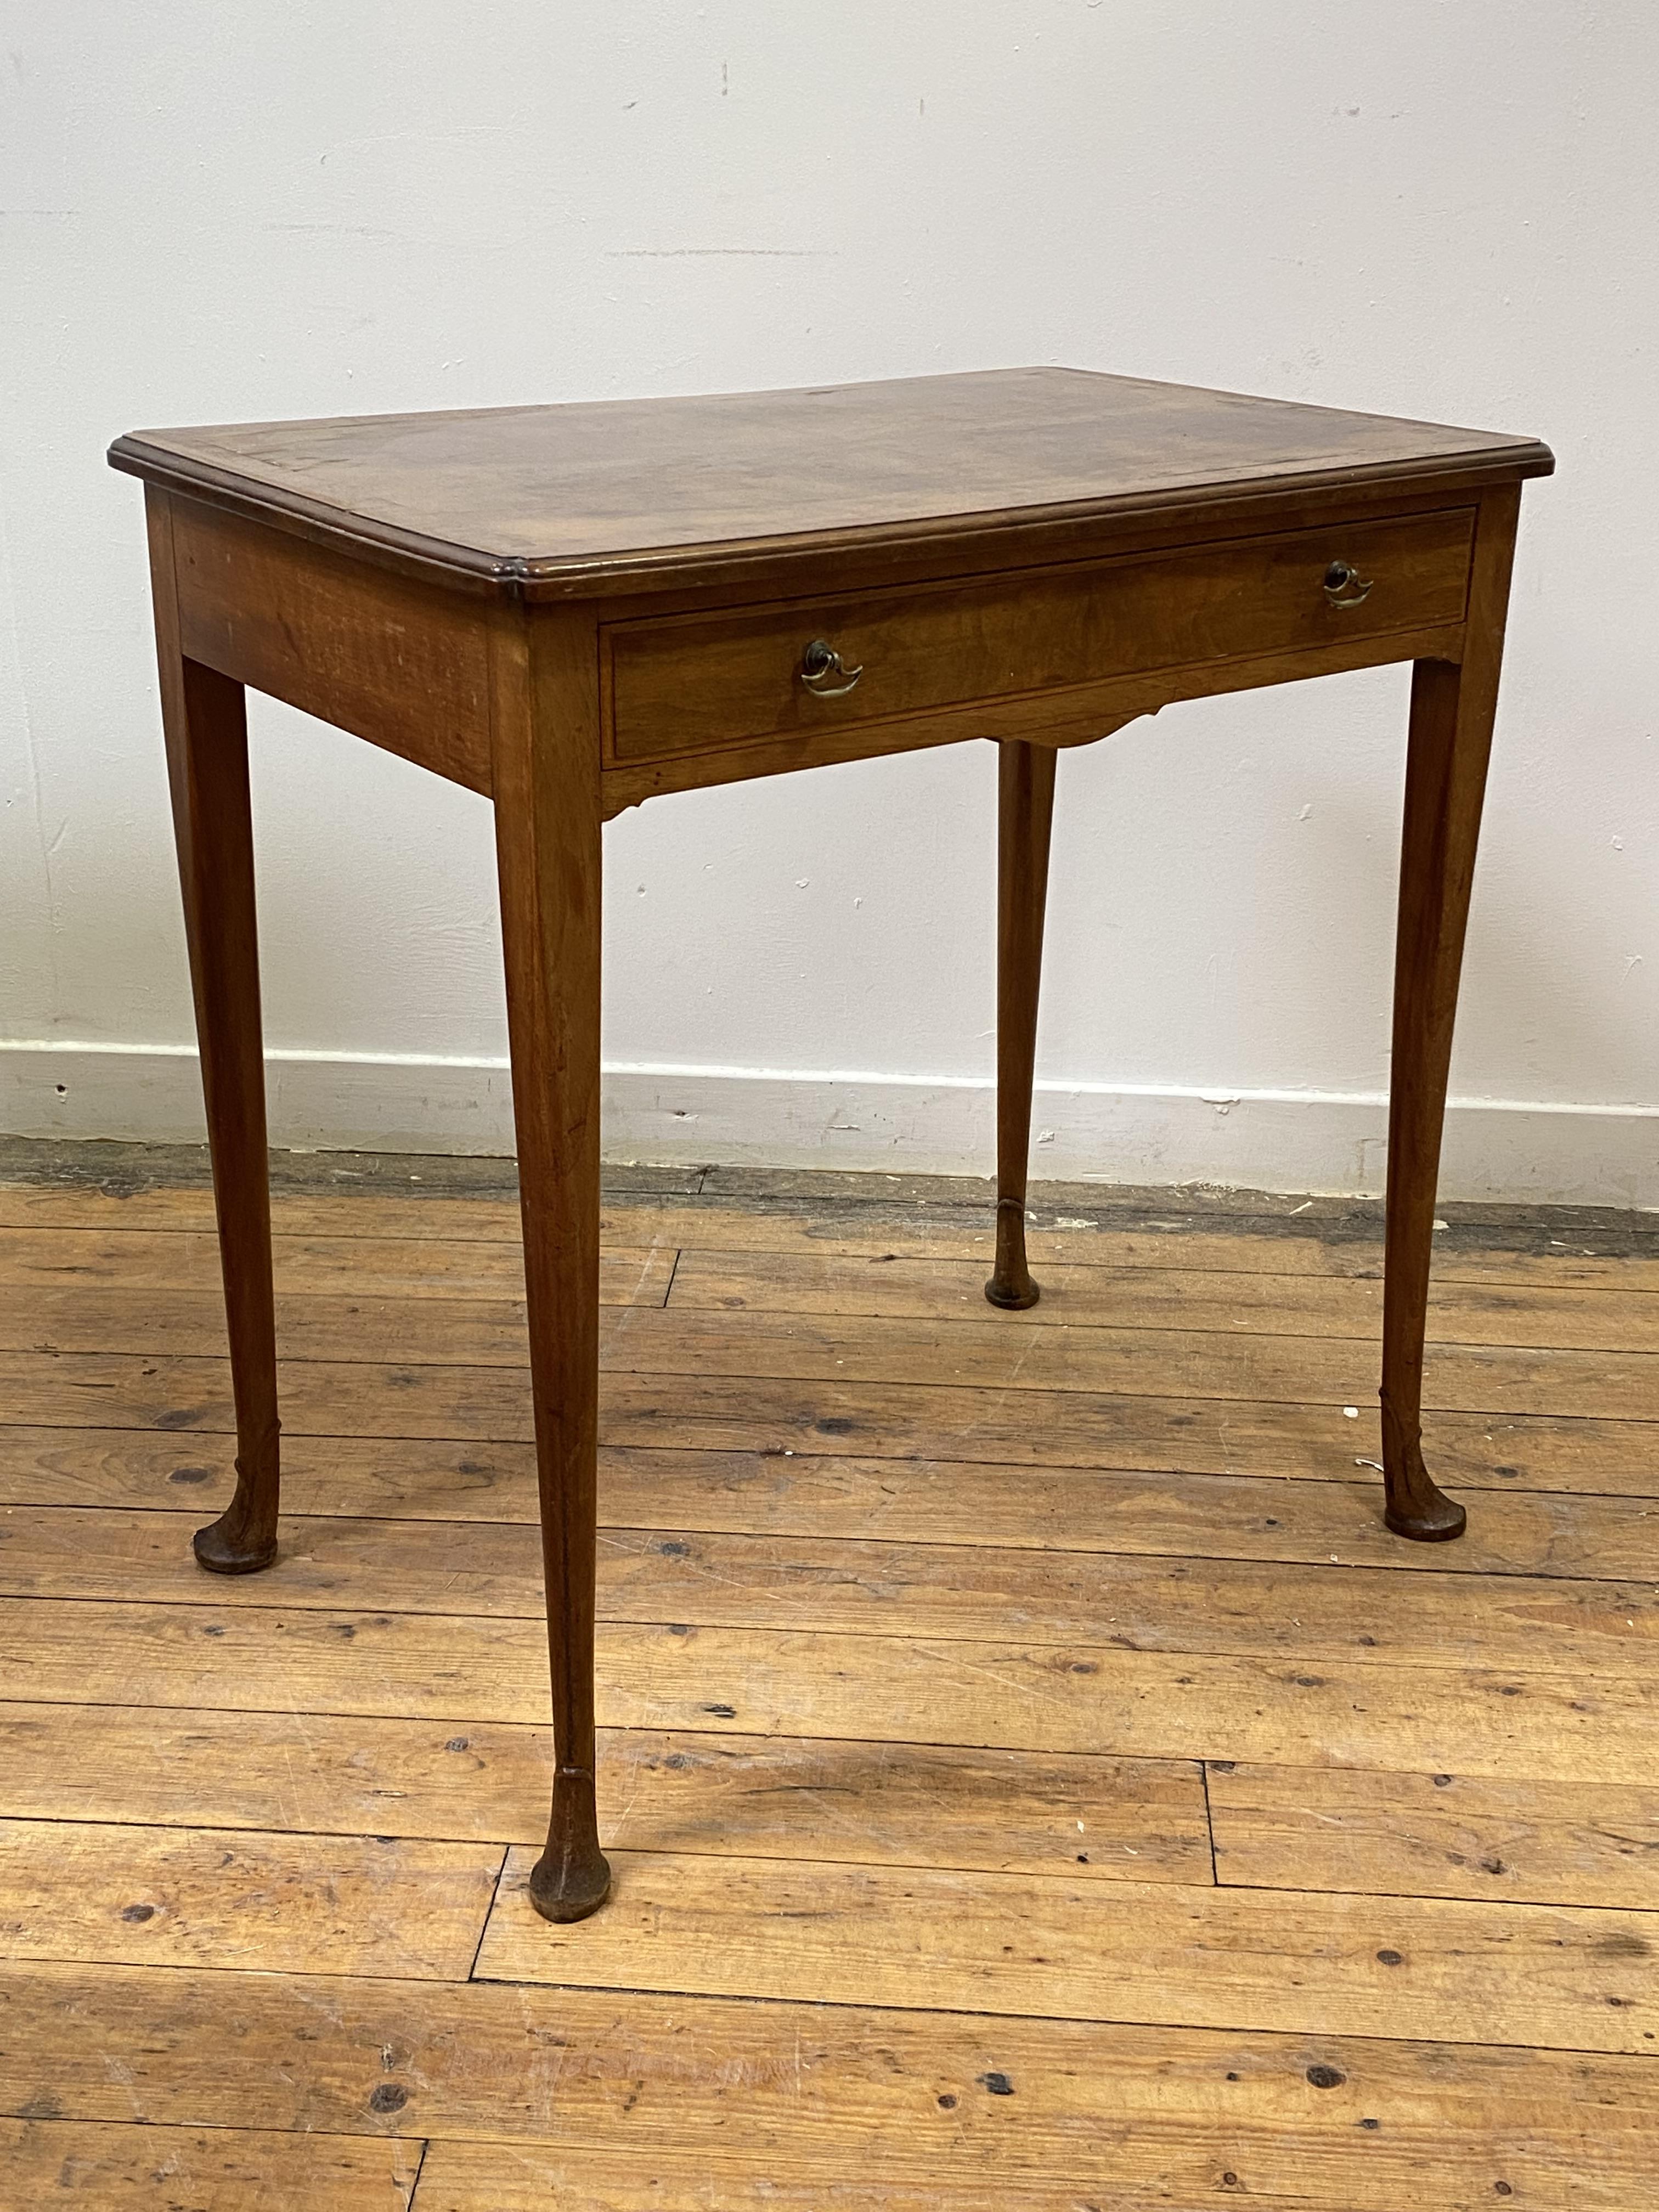 Whytock and Reid, an early 20th century walnut side table in the Georgian taste, the quarter sawn